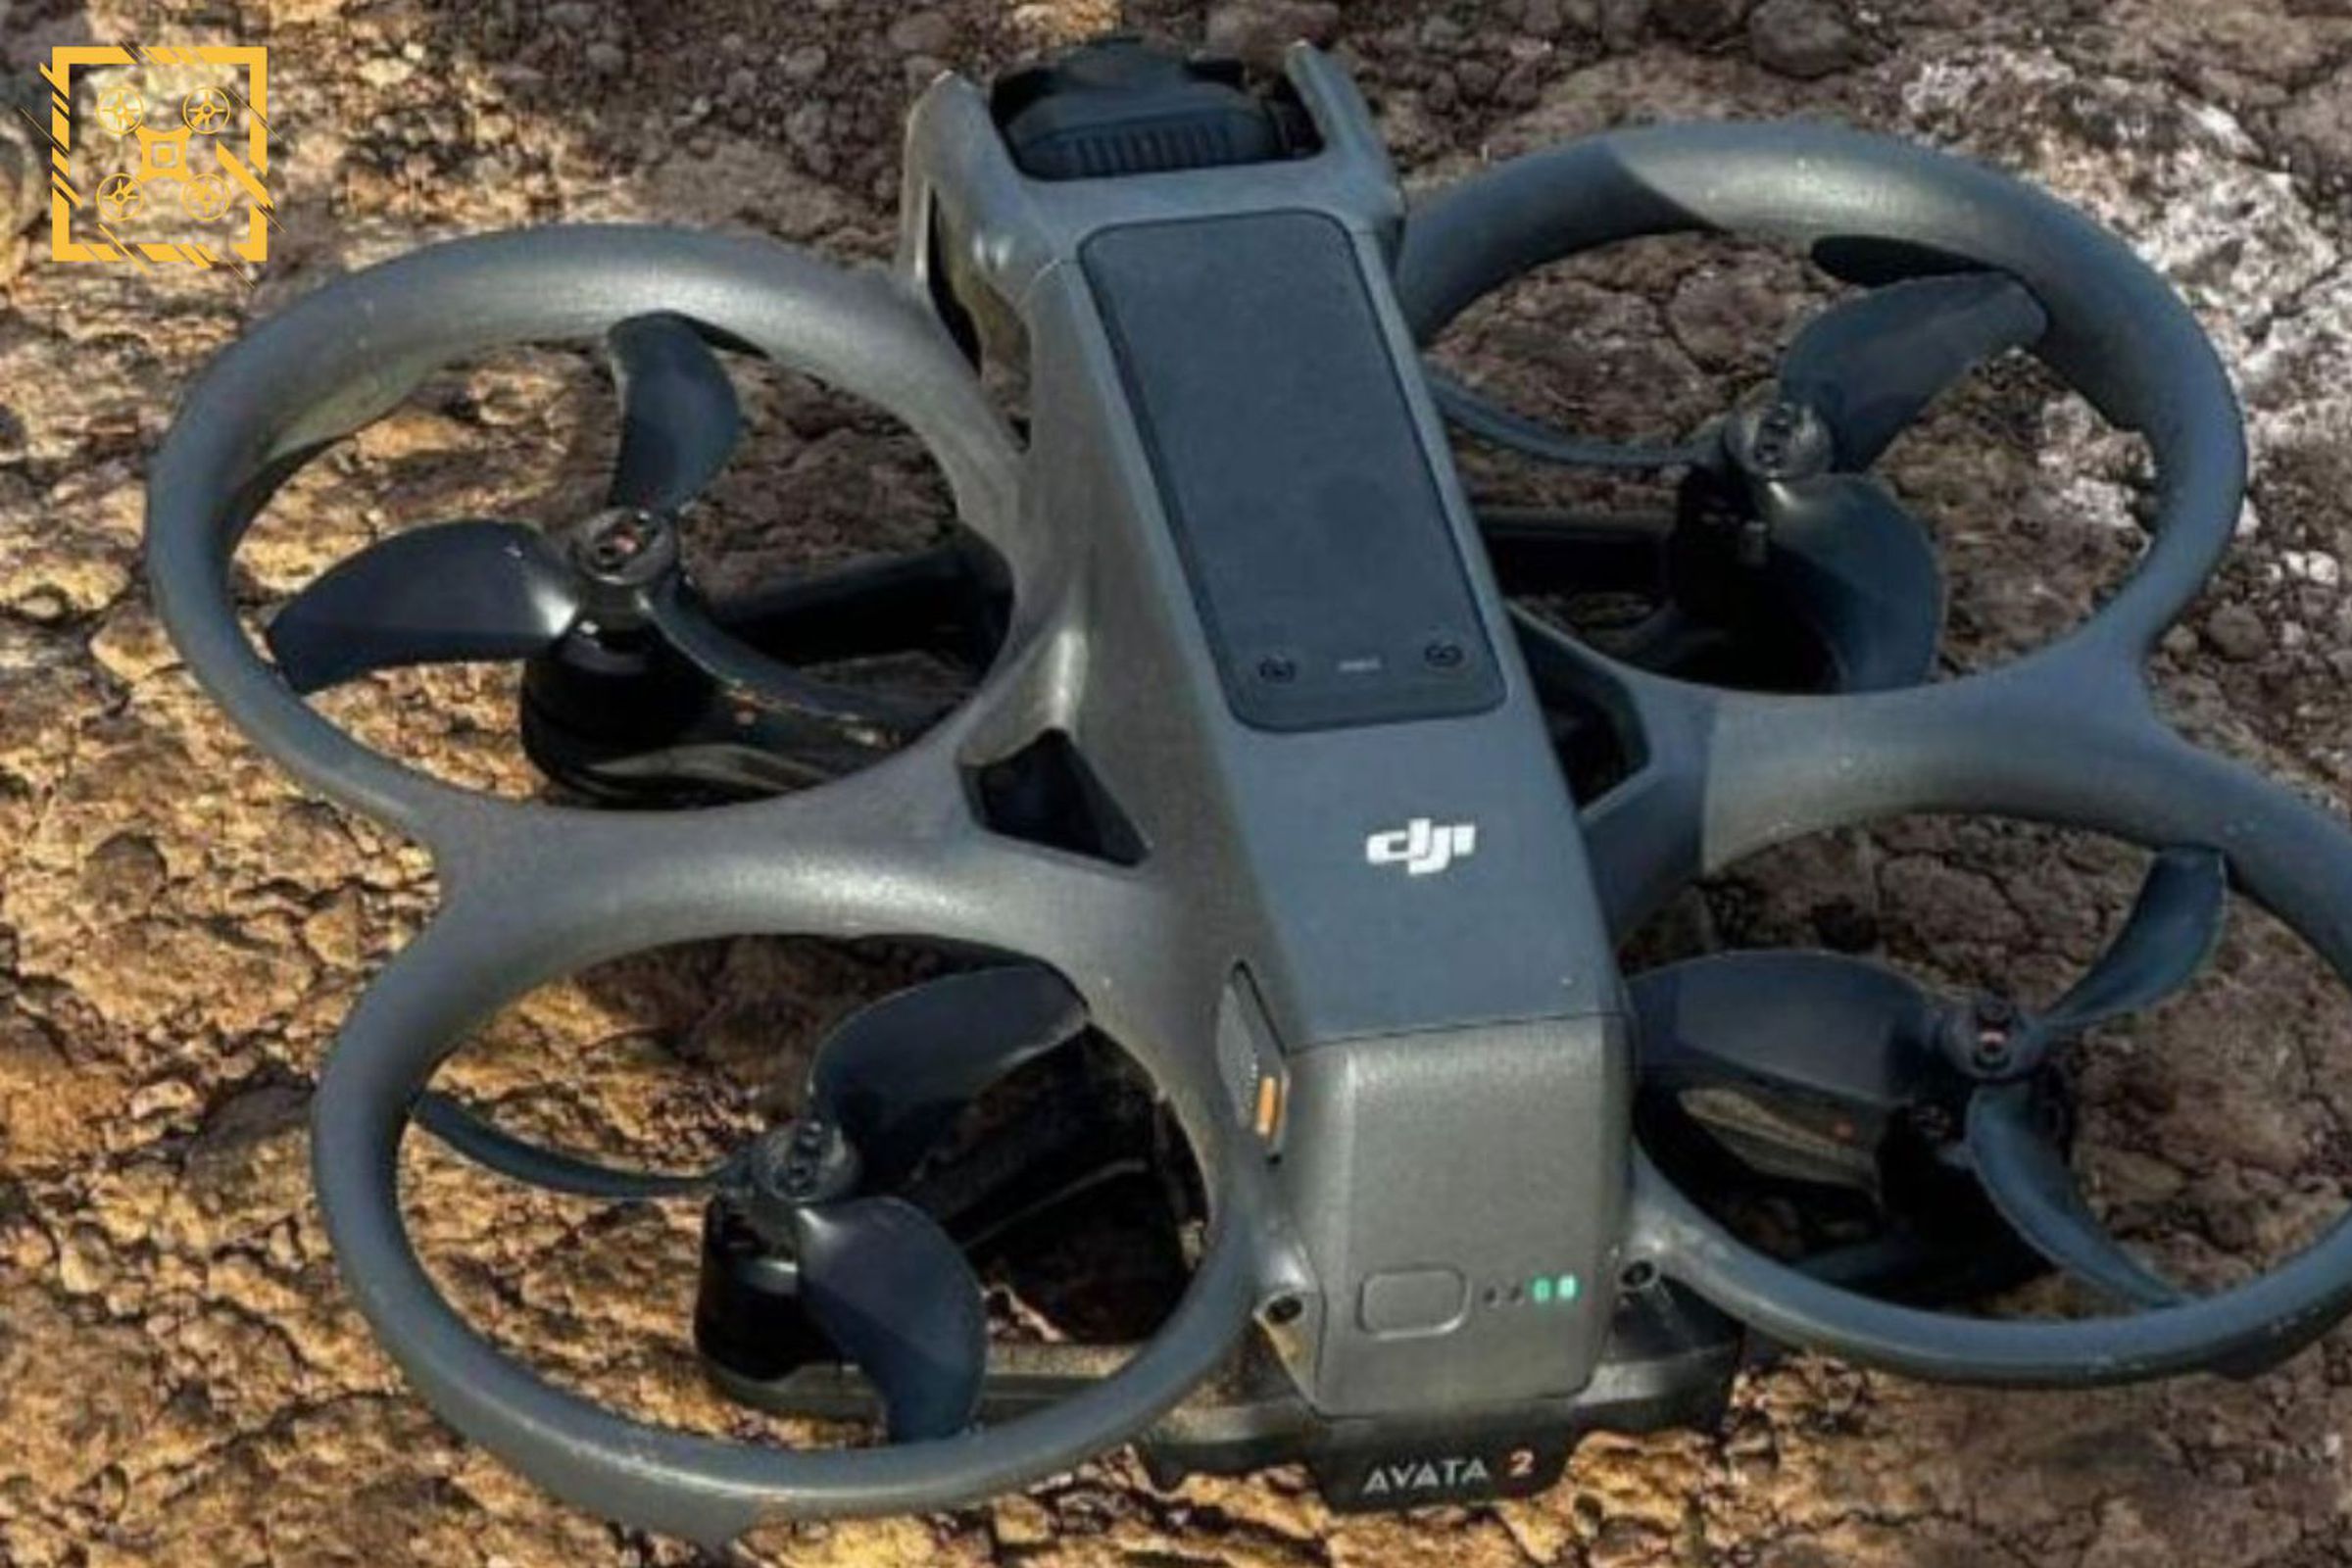 A photograph of the rumored DJI Avata 2 drone on a rocky outdoor surface.